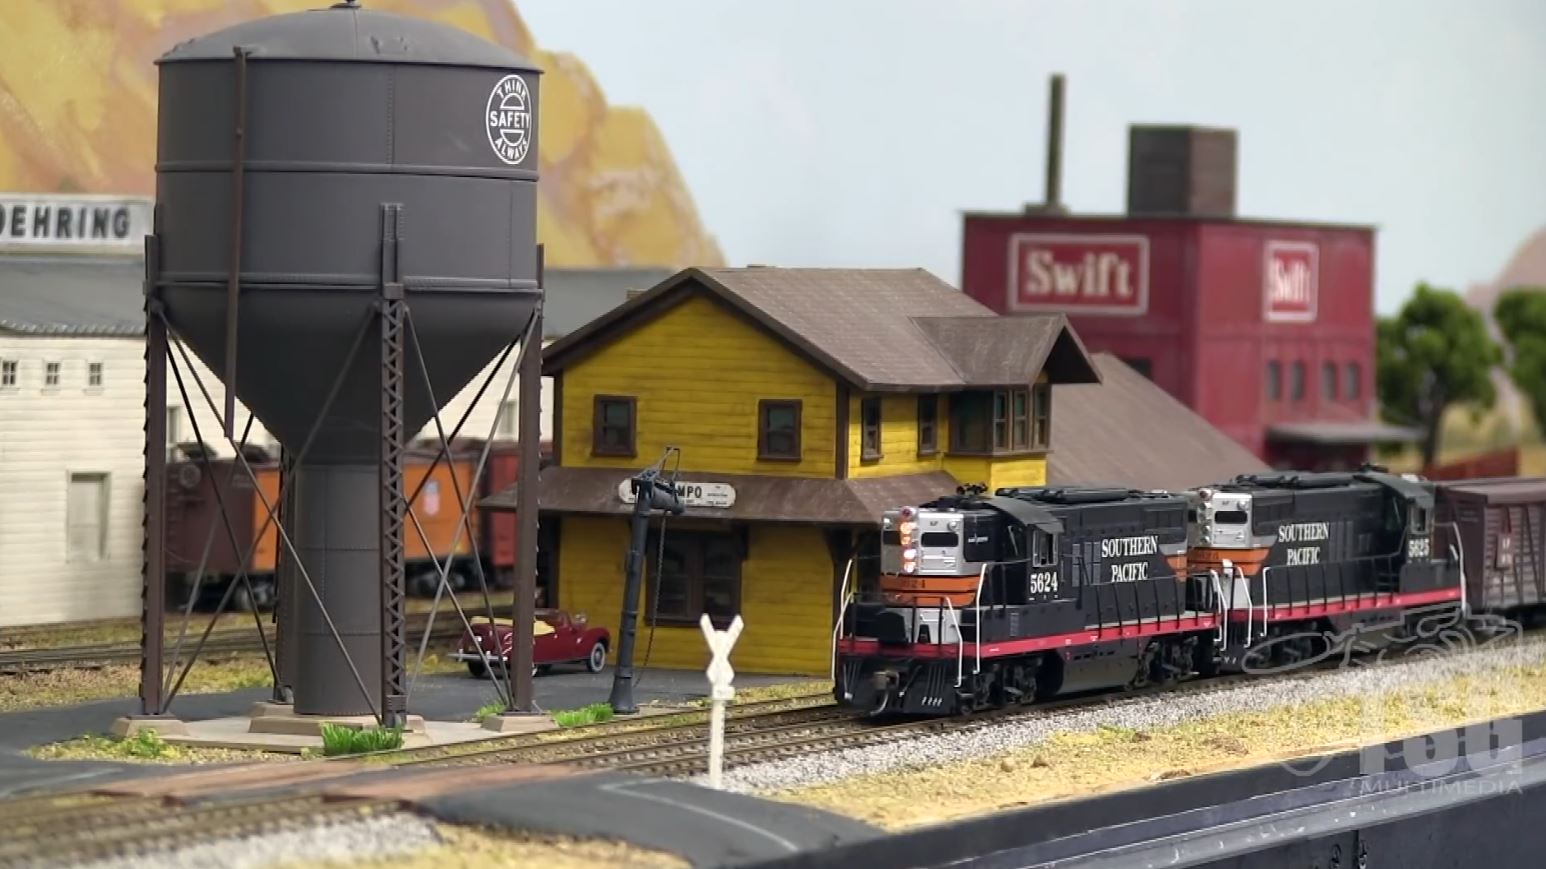 Morada Belt Railway HO Scale Model Railroad Layout Tour With Dave Stanley